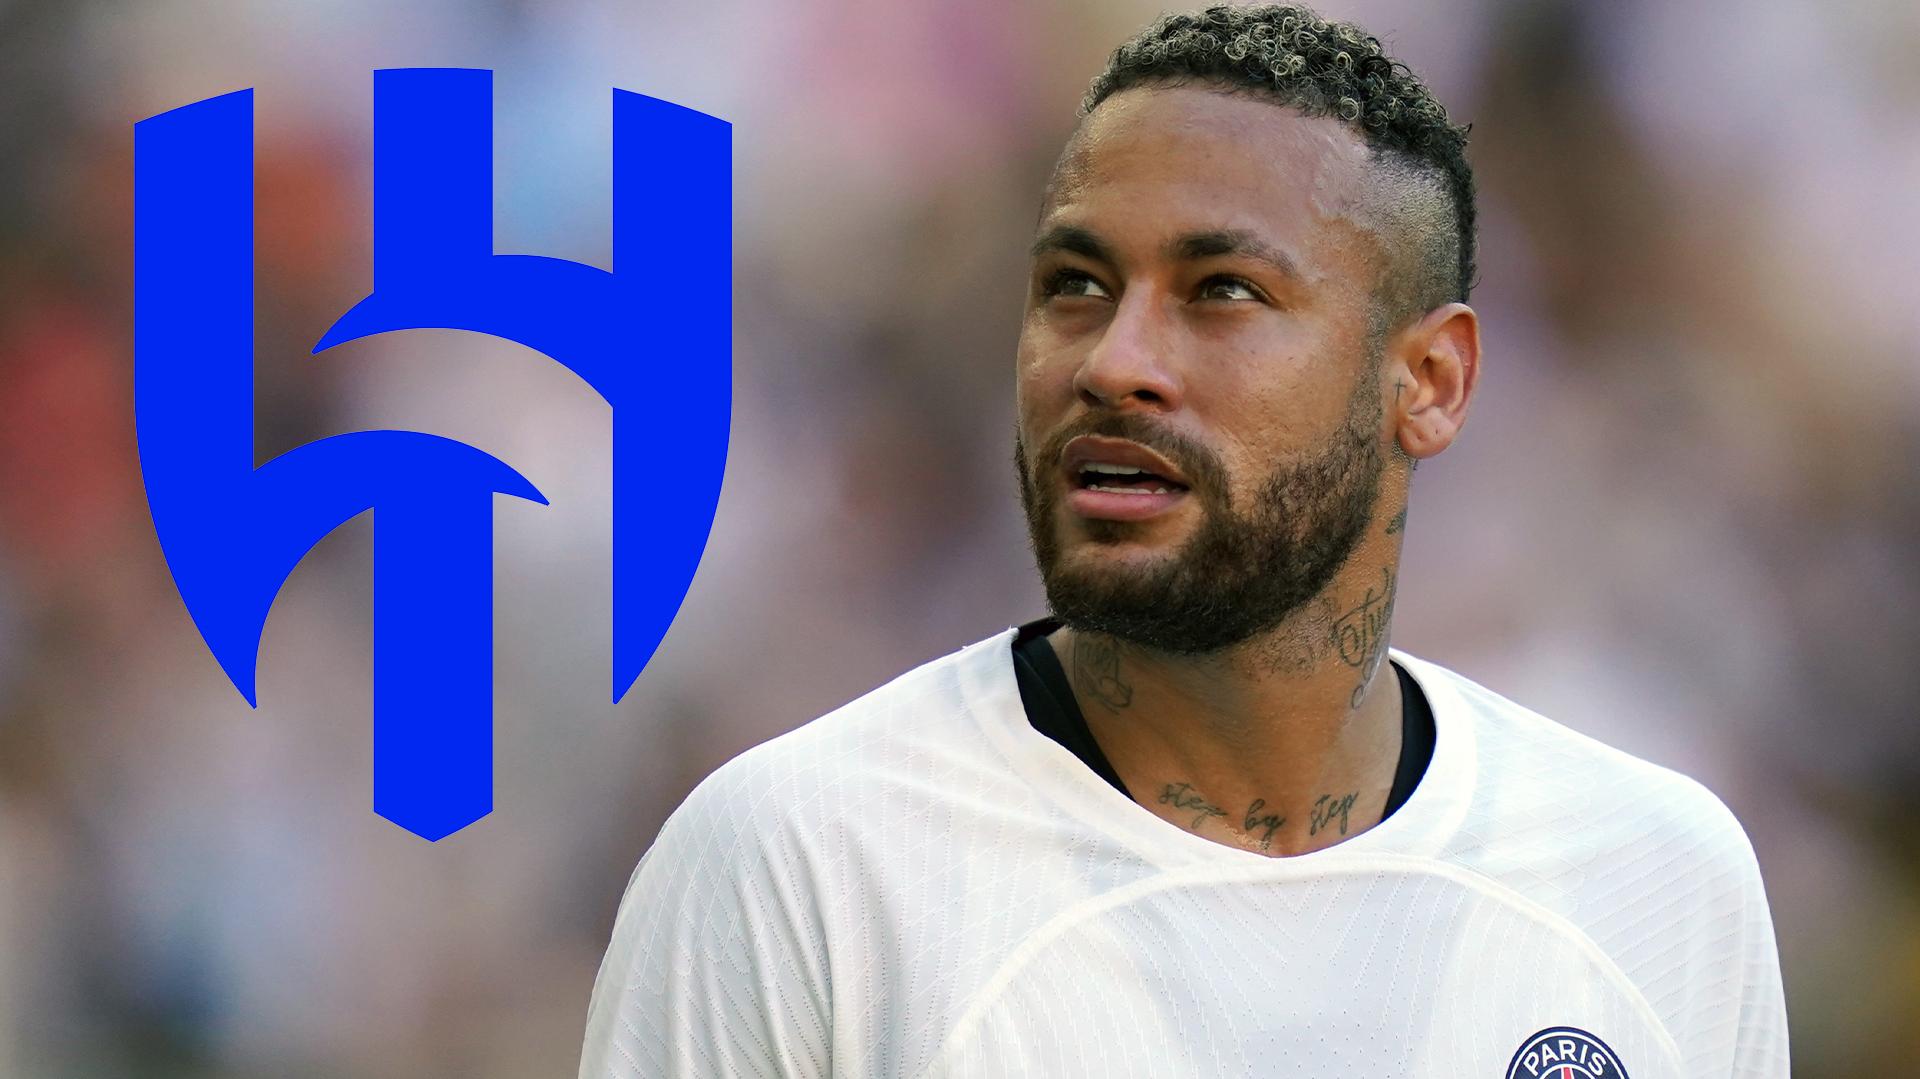 Neymar agrees sensational Al Hilal transfer from PSG that will see